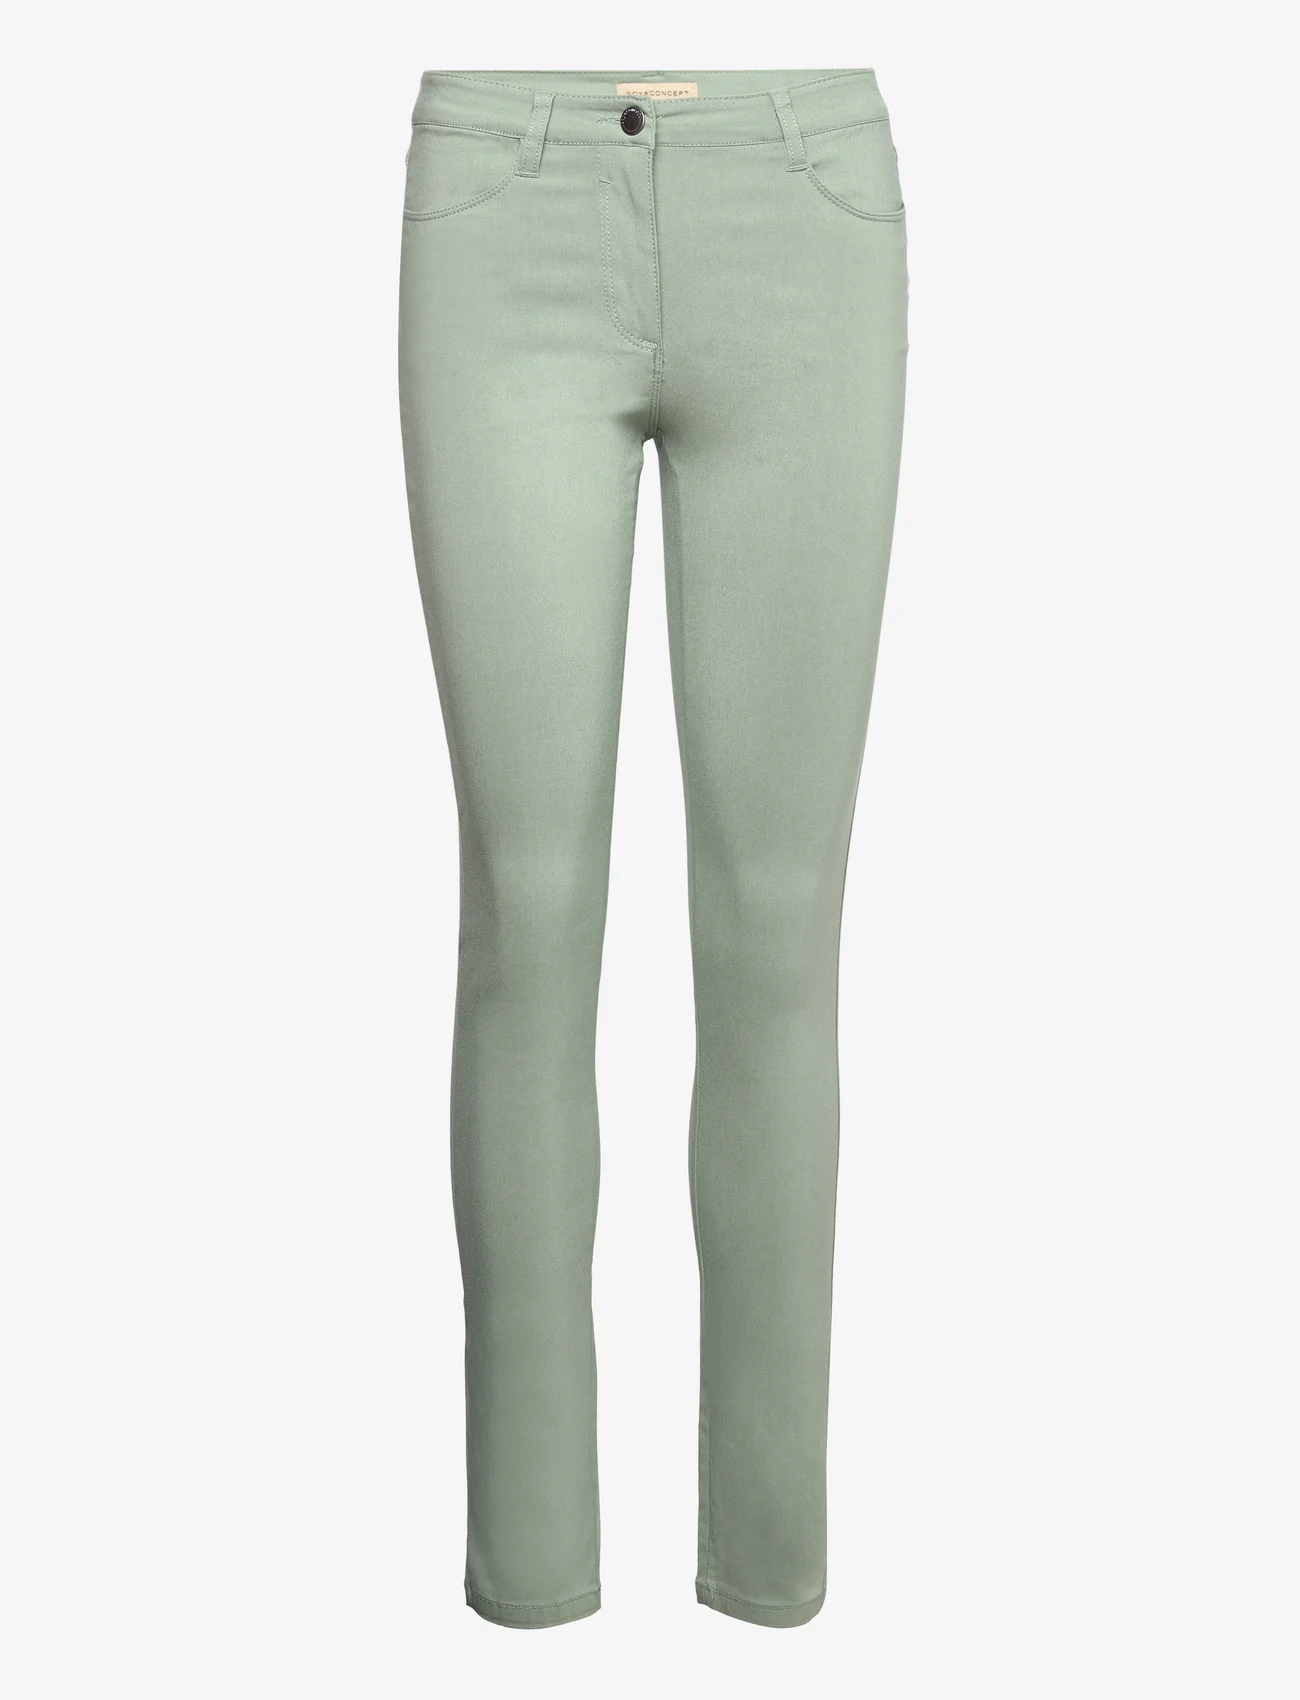 Soyaconcept - SC-LILLY - slim jeans - moss green - 0